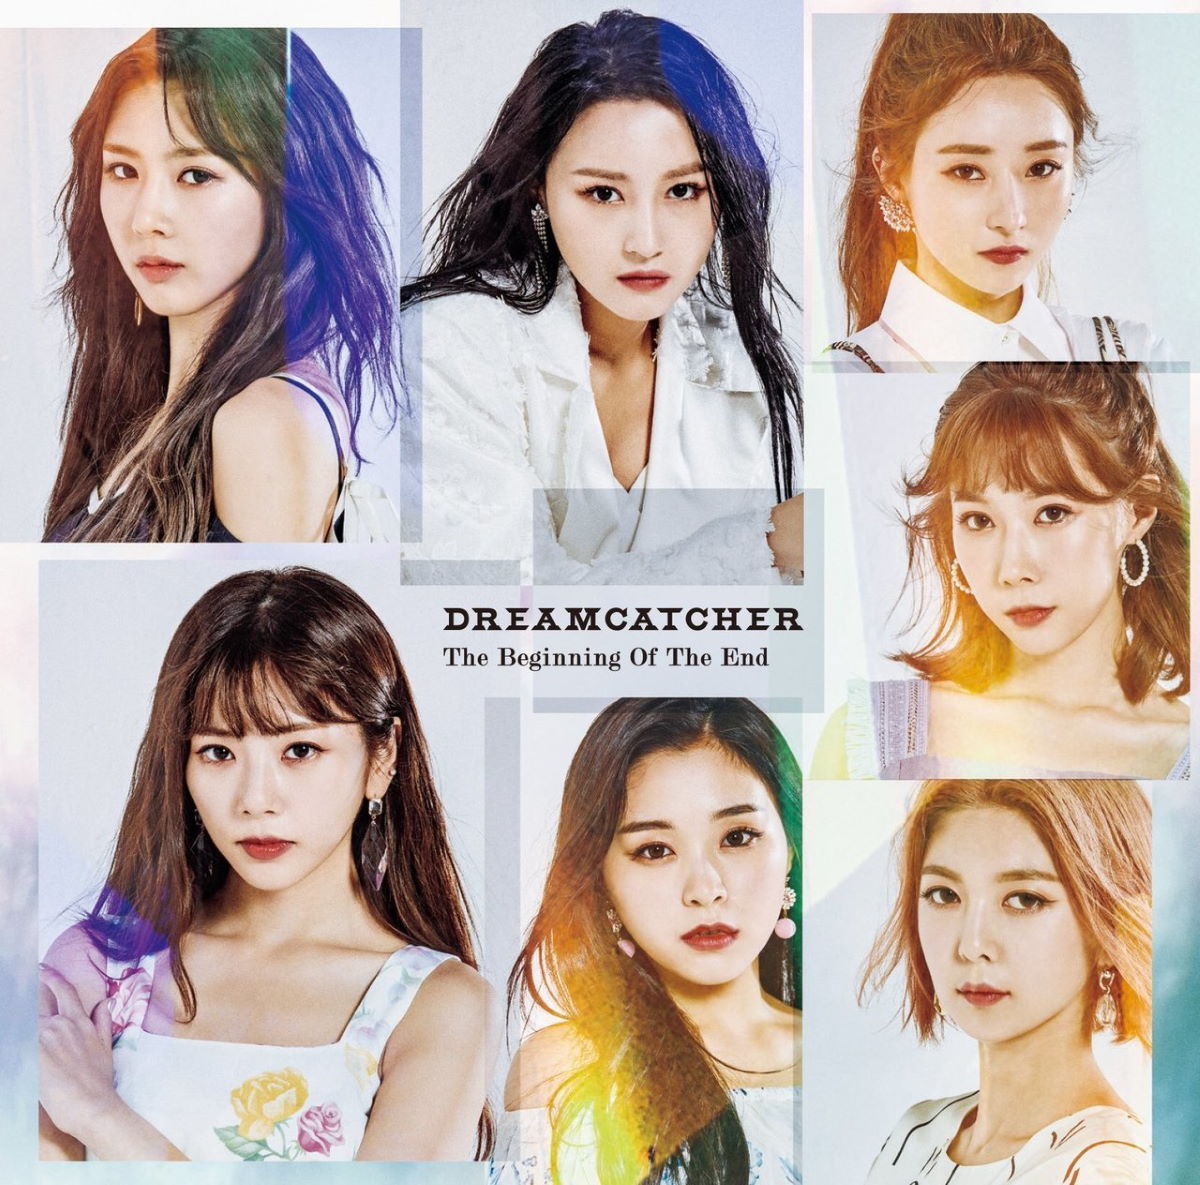 『DREAMCATCHER - YOU AND I -Japanese ver.- 歌詞』収録の『The Beginning Of The End』ジャケット